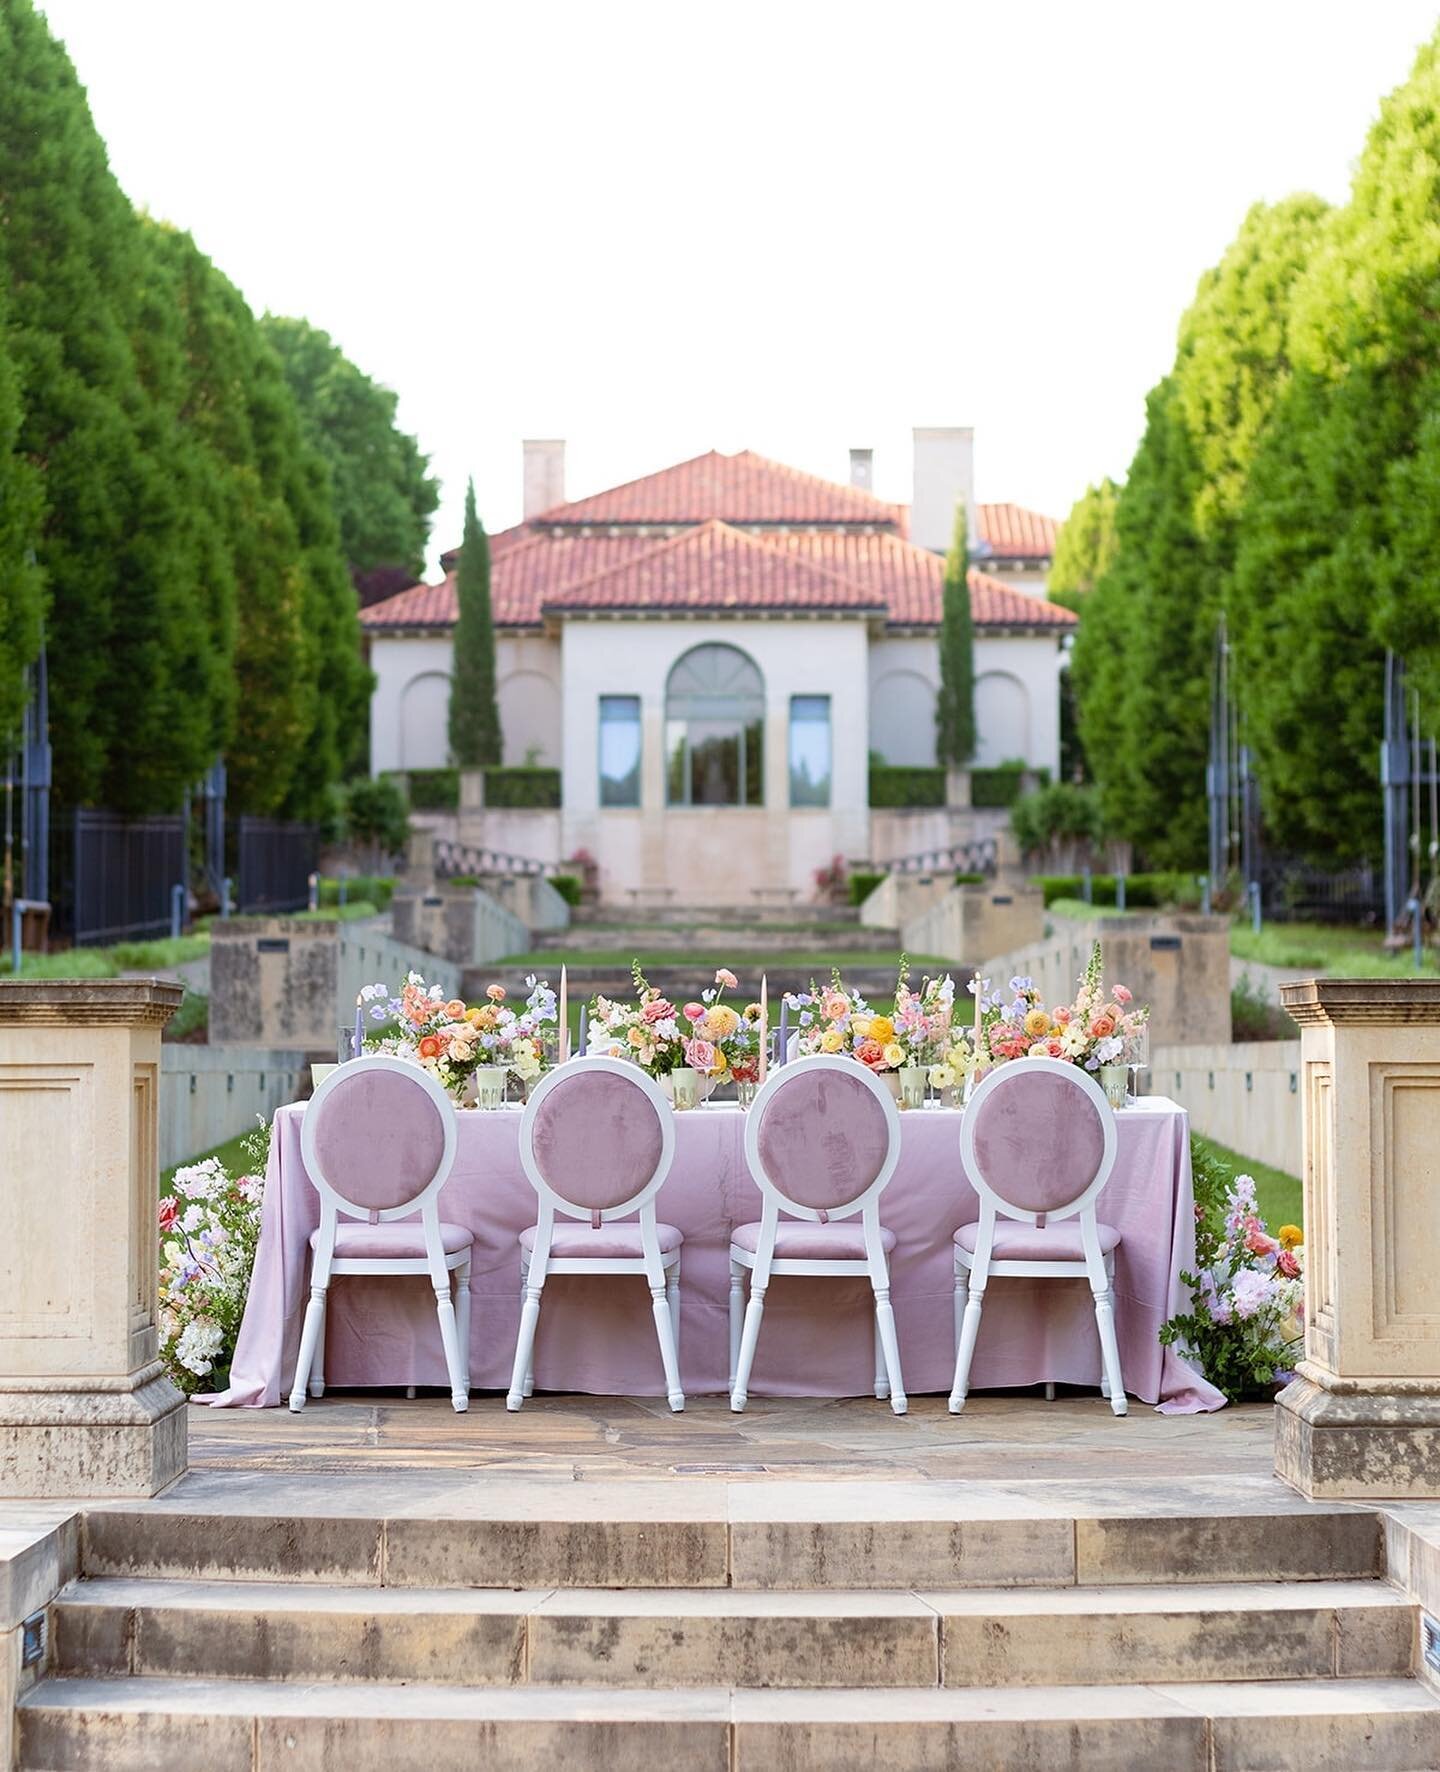 Brightening up this gloomy rainy Friday with some COLOR from a recent Philbrook shoot! ⁠
⁠
Swipe for more sherbet-hued springtime inspiration! 🌸🍊🦋⁠
.⁠
.⁠
photographer - @carsyn.craytor⁠
design, planner + florals - @eversomethingevents⁠
hair- @ashf